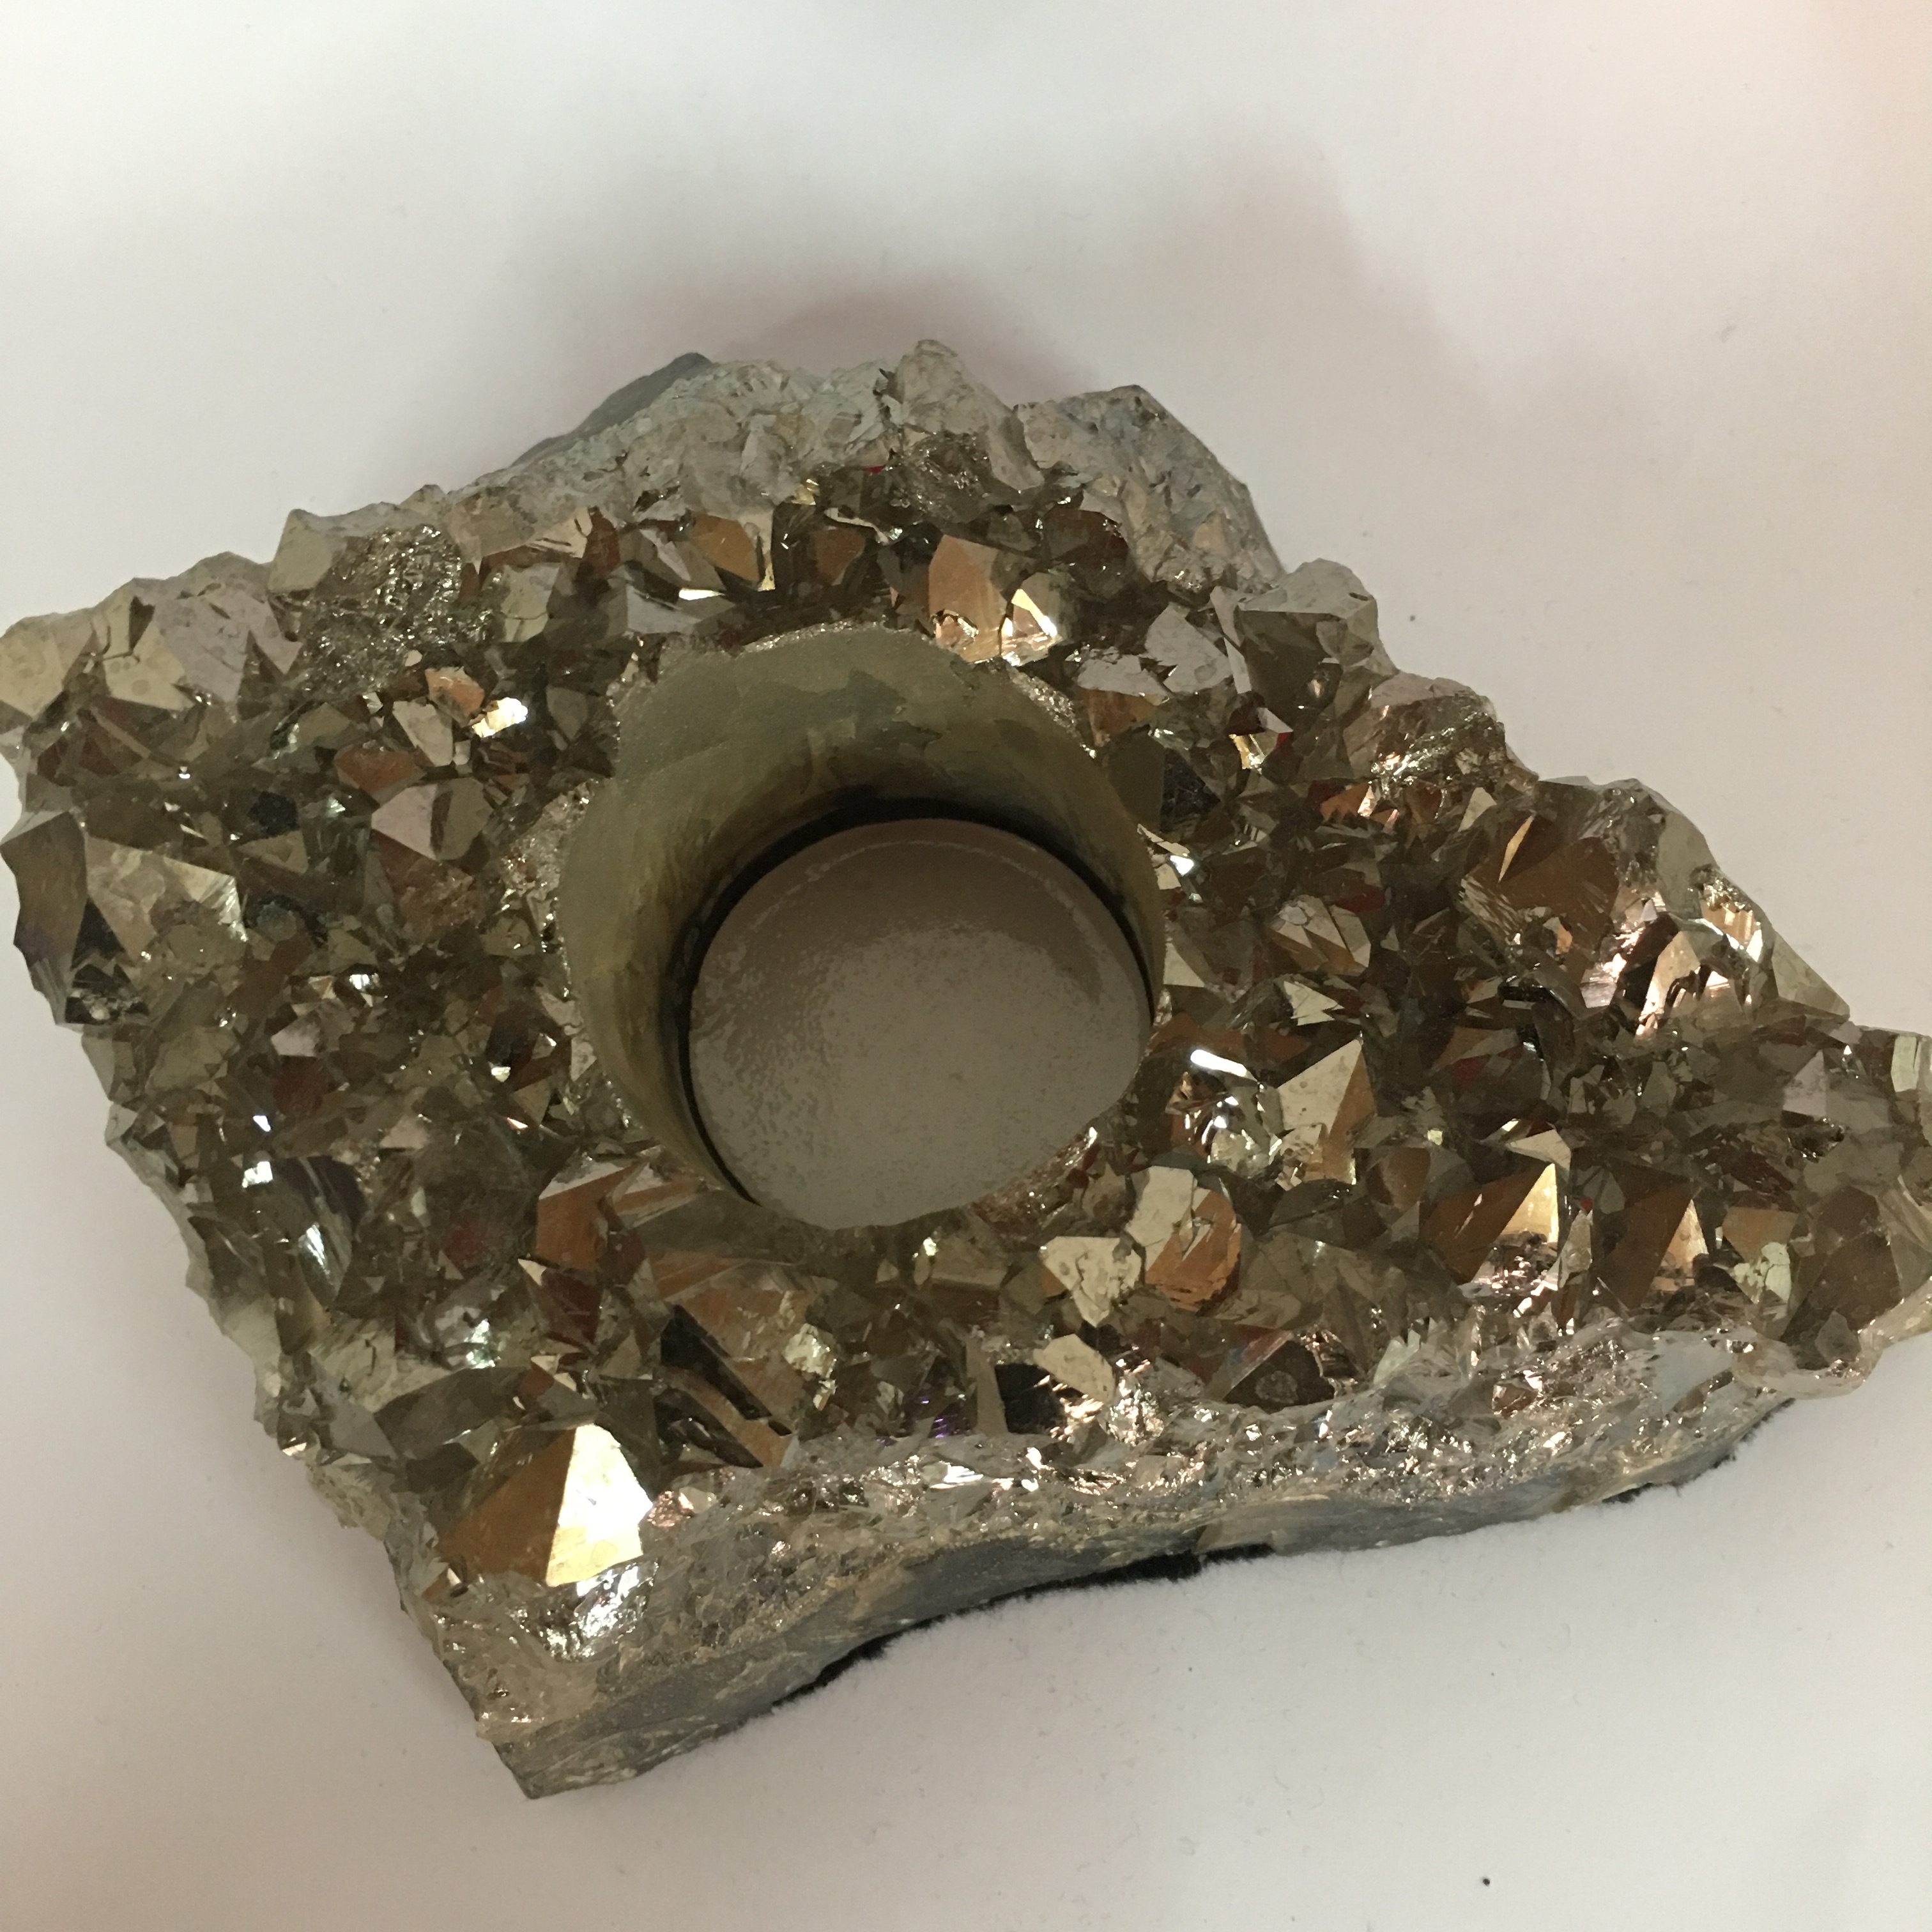 Stones from Uruguay - Old Silver Amethyst Druzy Candle Holder 